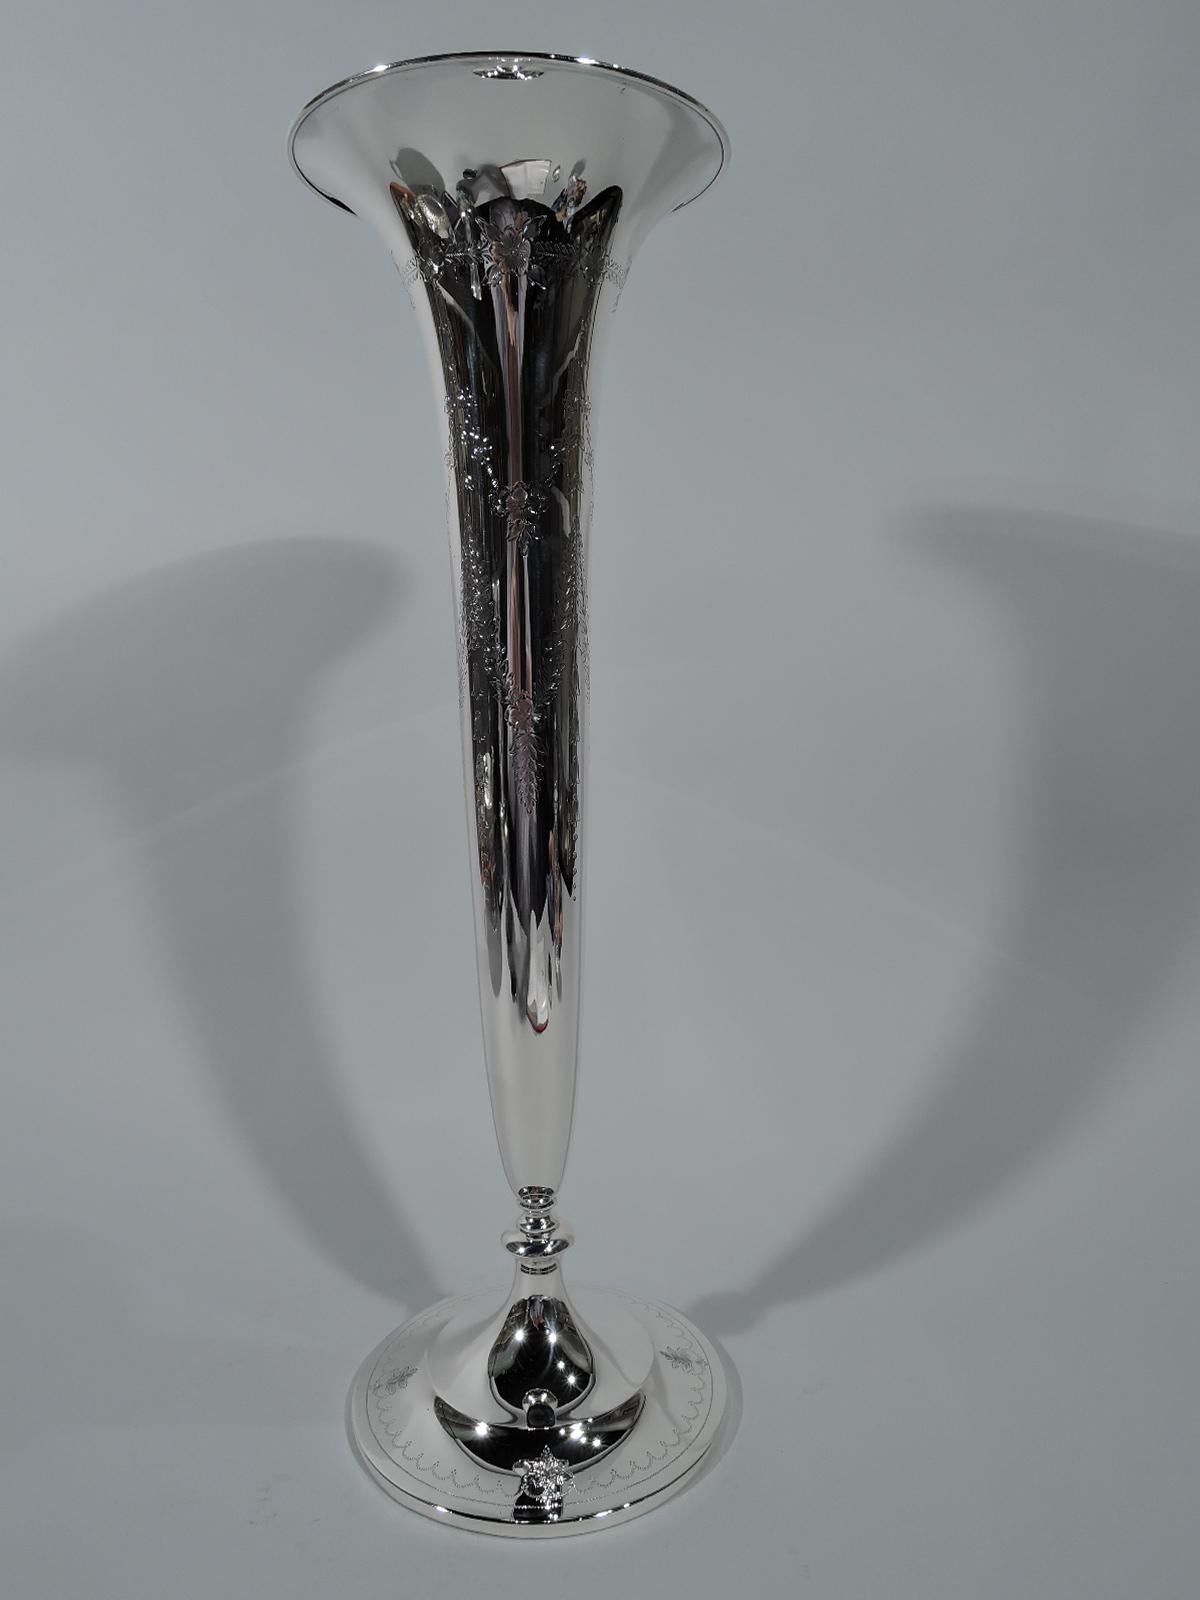 Edwardian sterling silver trumpet vase. Made by S. Kirk & Son Co. Tall, narrow and tapering with flared rim on knop on double-domed foot. Engraved pendant garlands forming frames (vacant). Foot has engraved scalloped border interspersed with leaves.